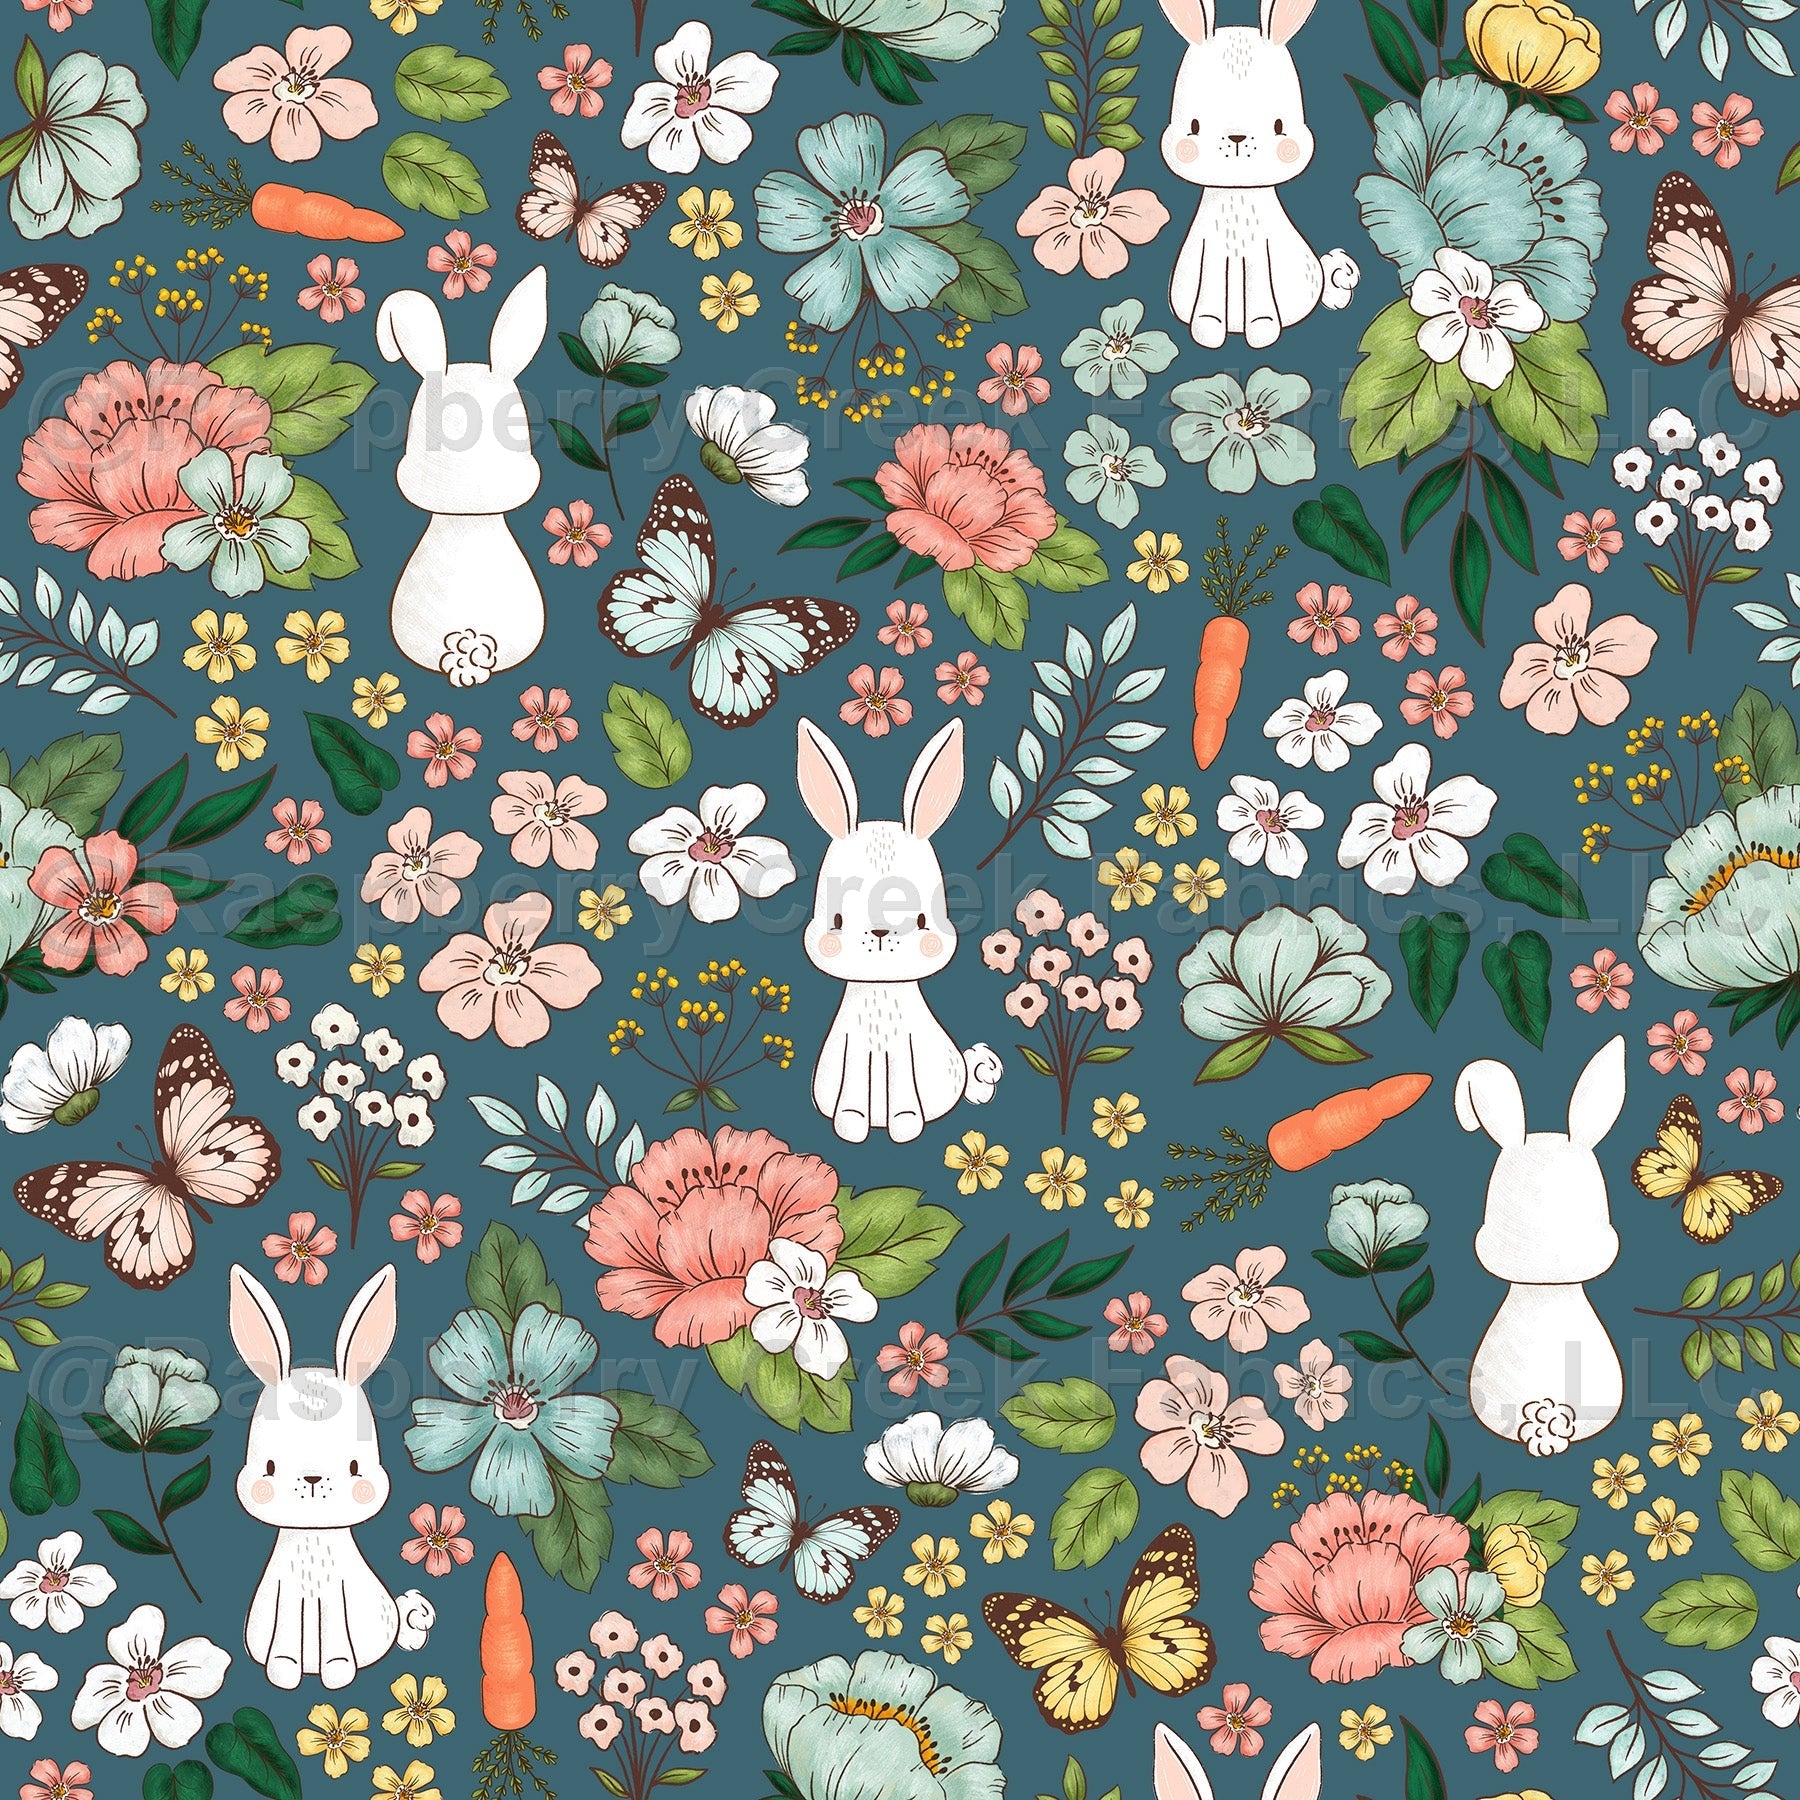 Bunny Garden, Hand drawn bunnies in a field of pink, blue, and yellow flowers with butterflies on a navy blue background, Bunny Trail Collection Fabric, Raspberry Creek Fabrics, watermarked